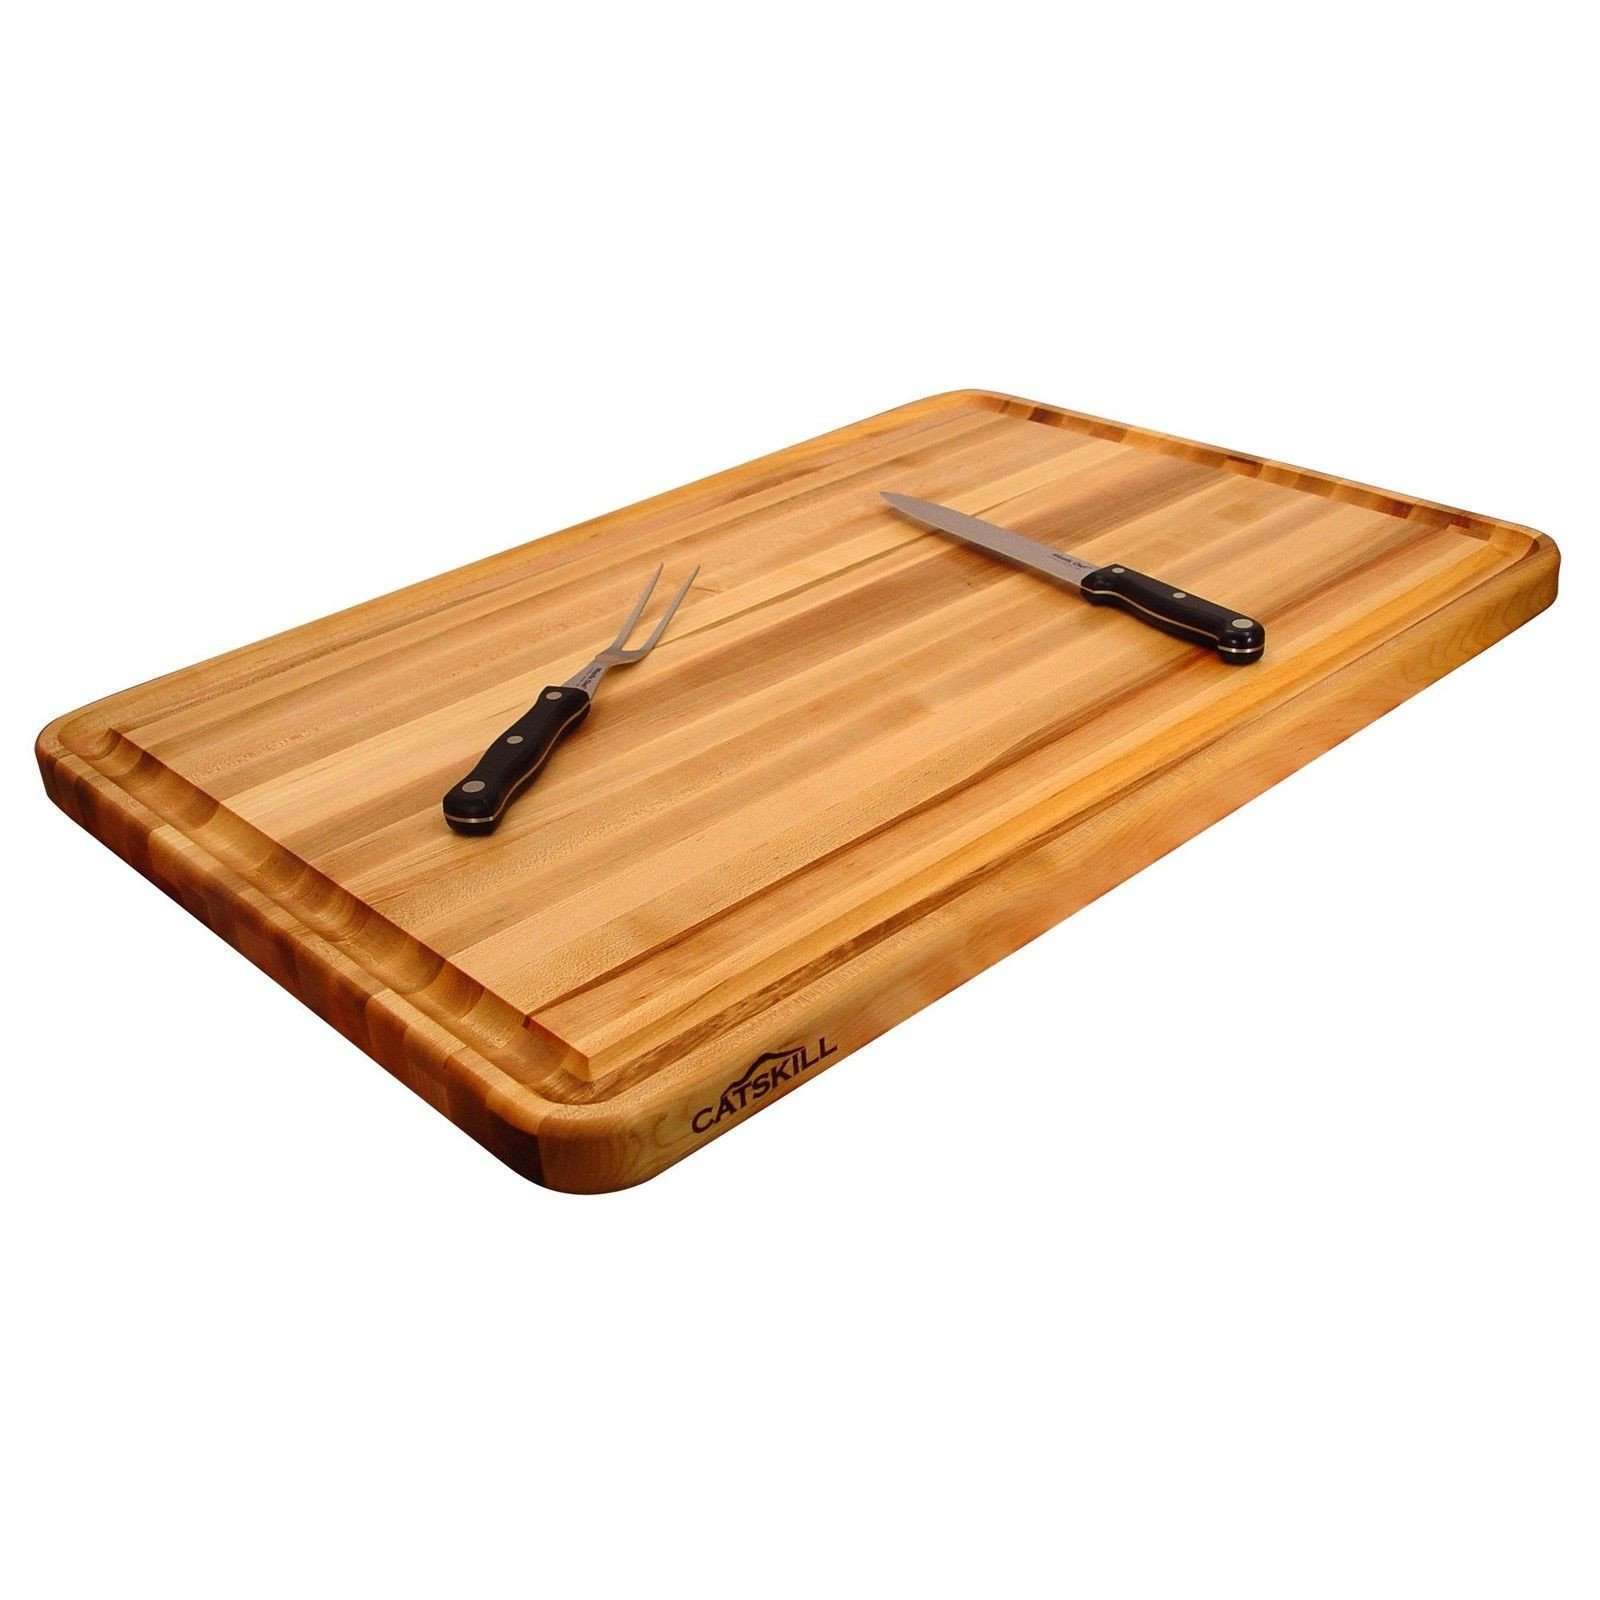 Catskill Craftsmen 30 Inch Pro Series Reversible Cutting Board With Groove Swiftsly 